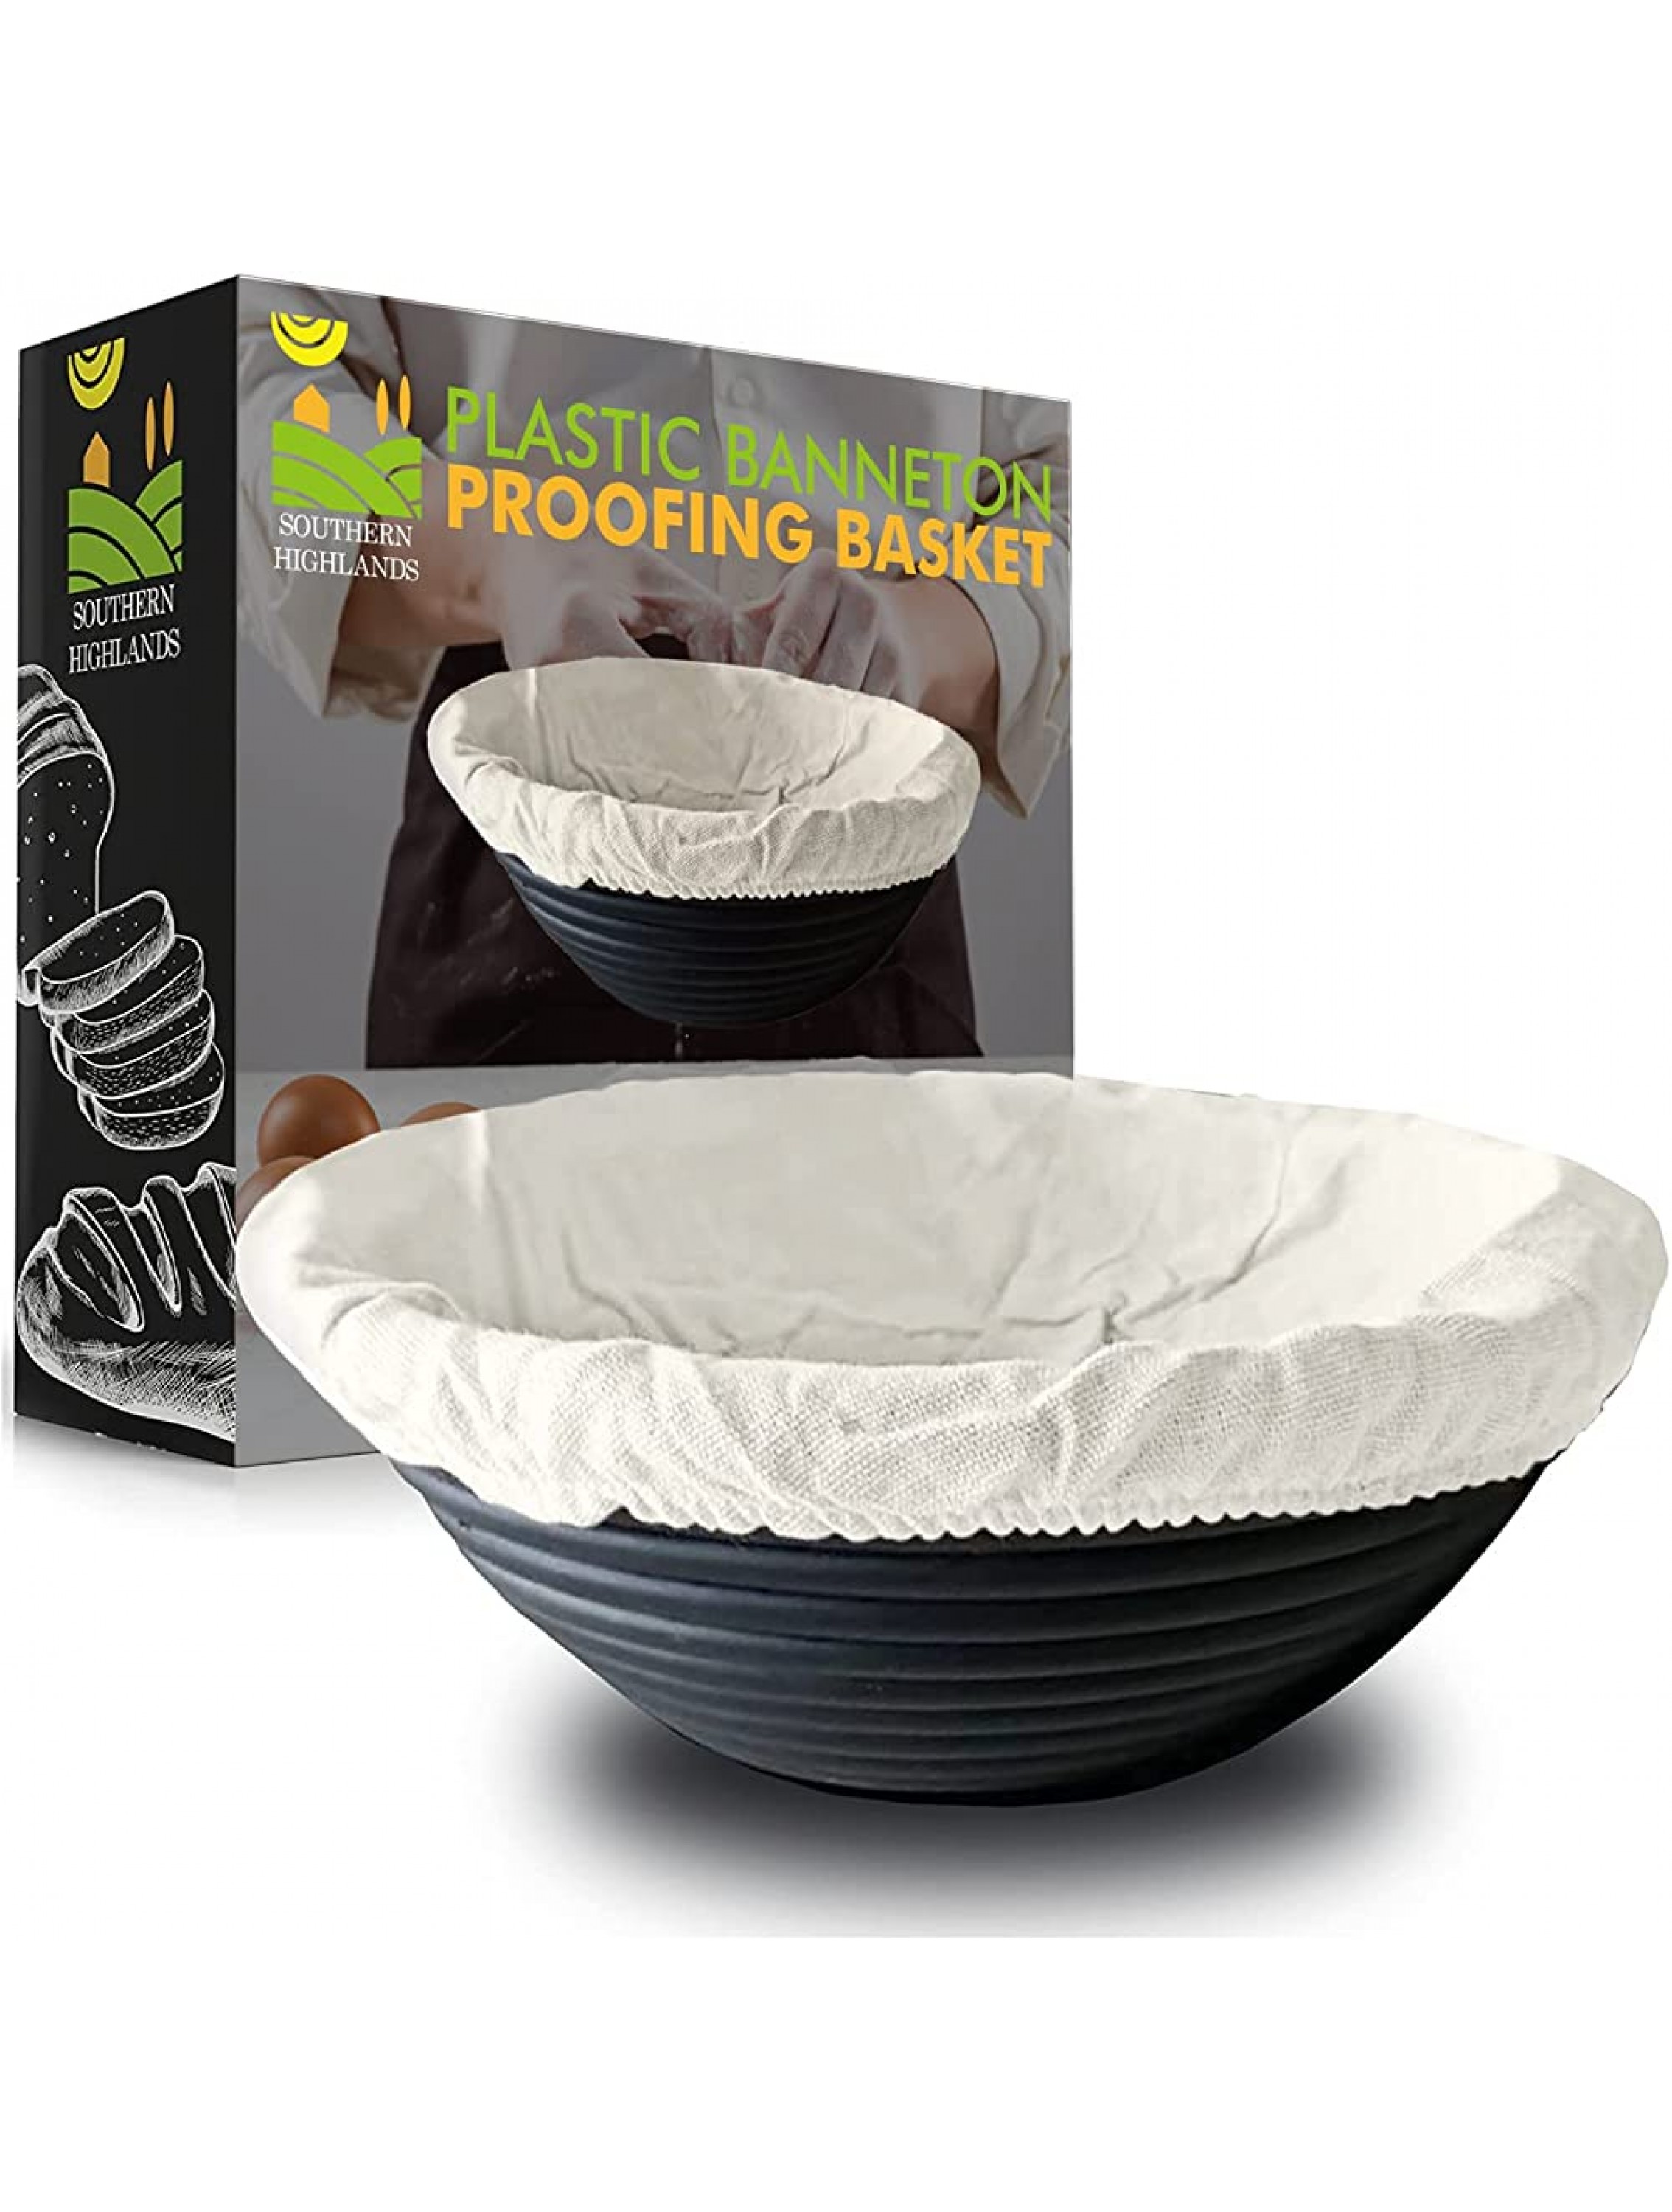 Southern Highlands Banneton Bread Proofing Basket – Non-wood Durable Plastic Proofing Basket with Cloth Liner – Sourdough Bread Making Starter Kit – Smooth Removal of Dough 9.8″ x 3.1″ - BWXTZO4E6